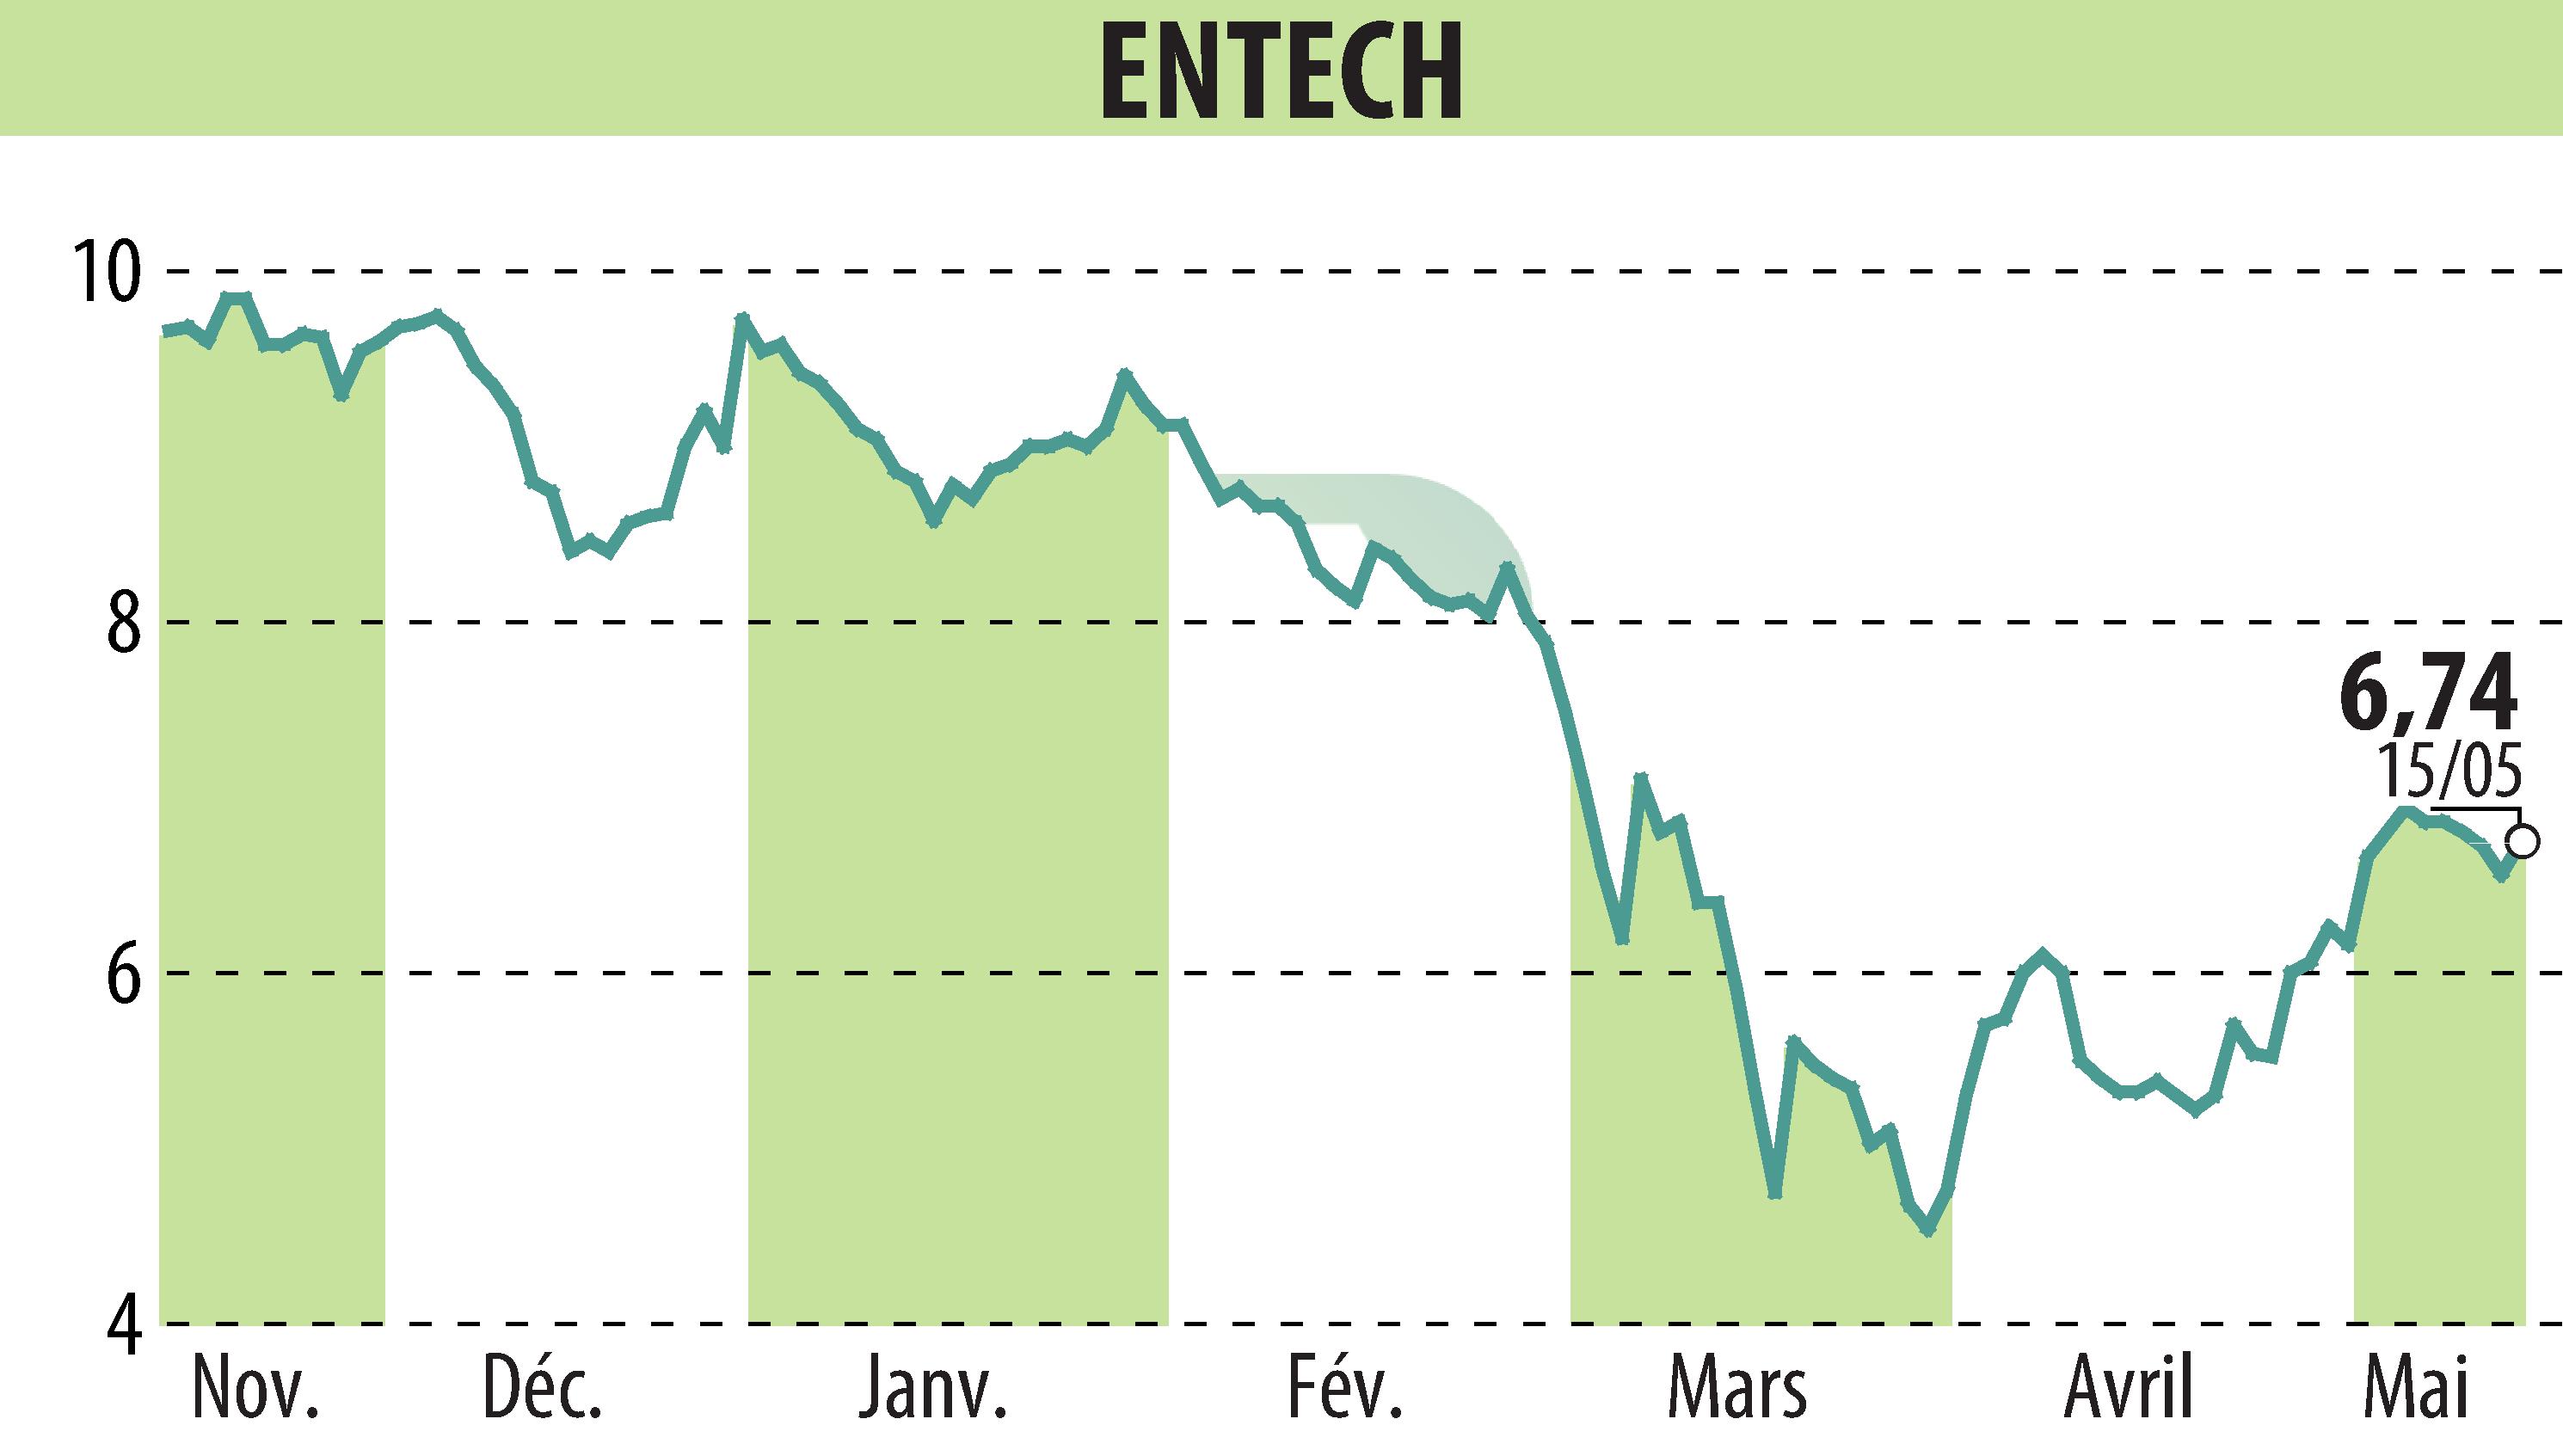 Stock price chart of ENTECH (EPA:ALESE) showing fluctuations.